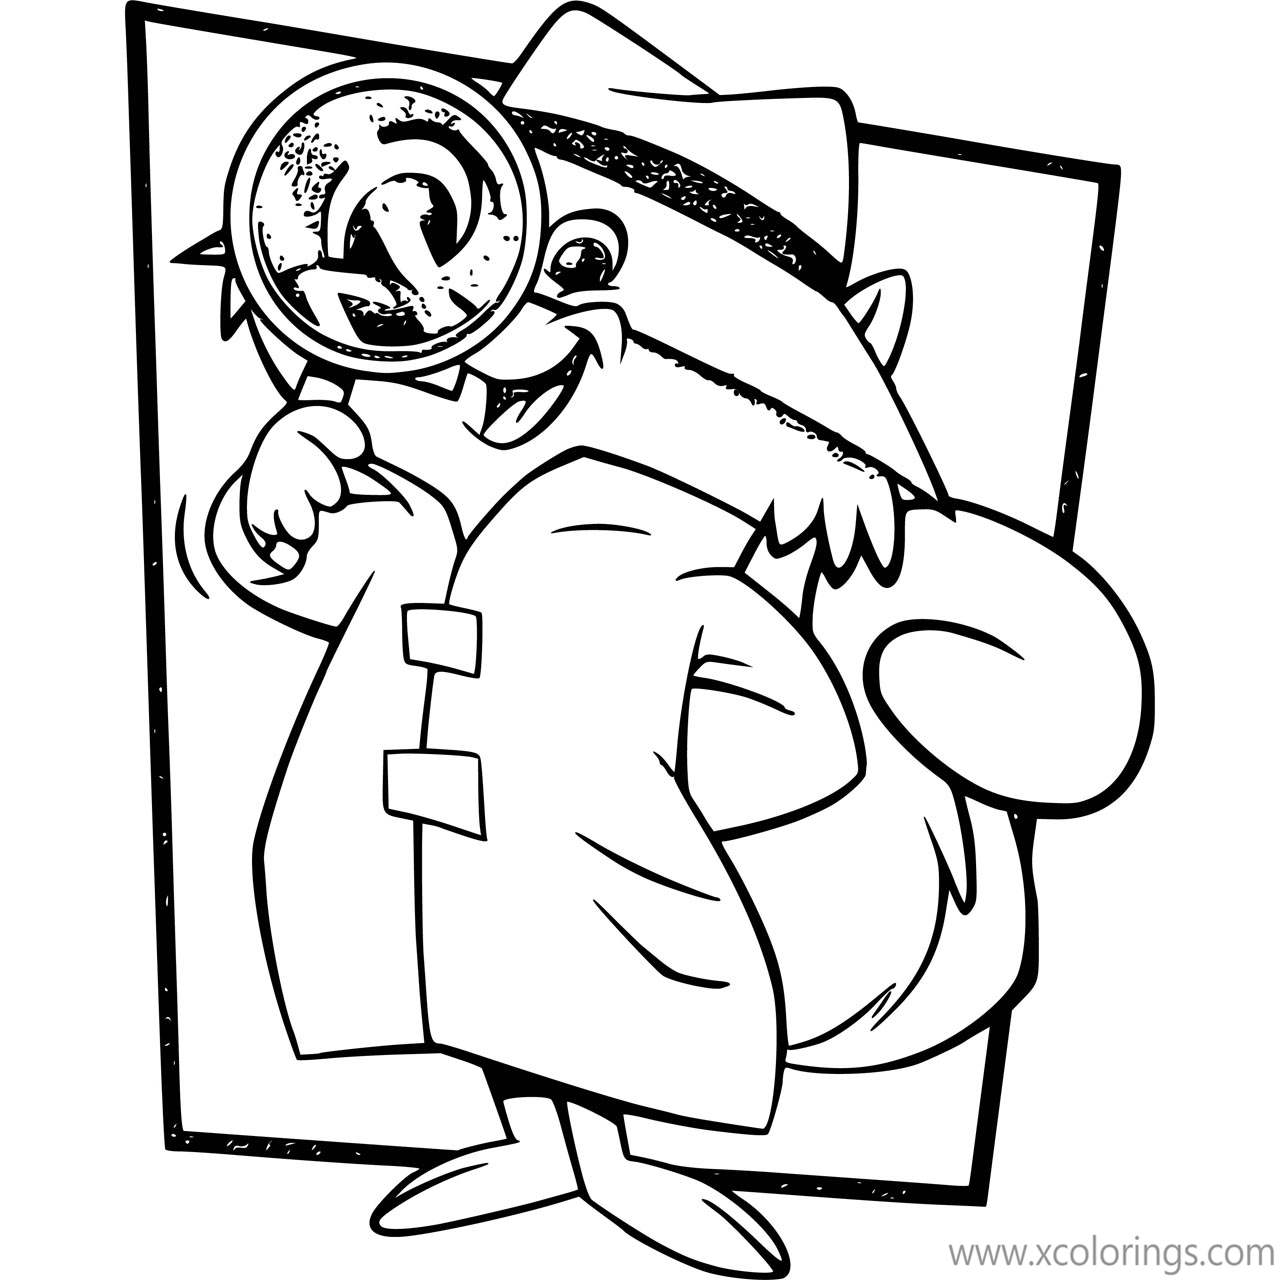 Free Secret Squirrel Coloring Pages with Magnifying Glass printable